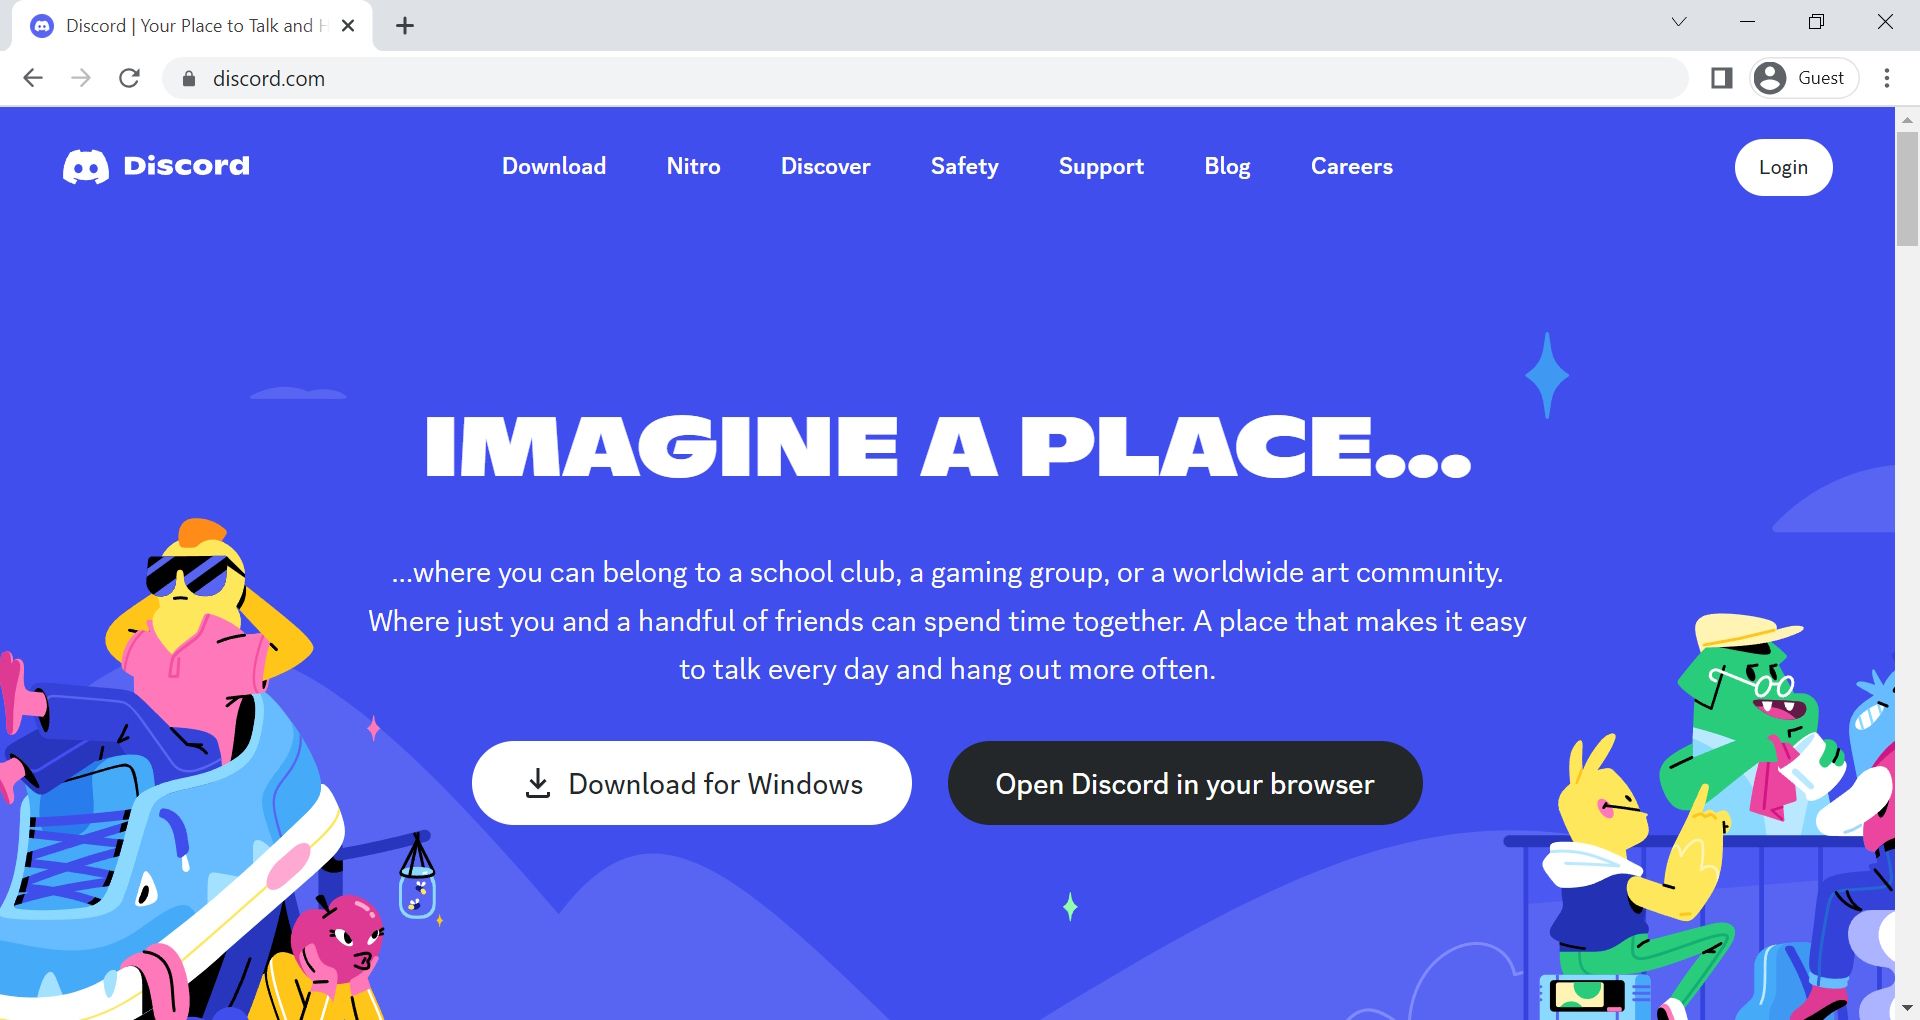 Display of the Discord home page on Google Chrome desktop